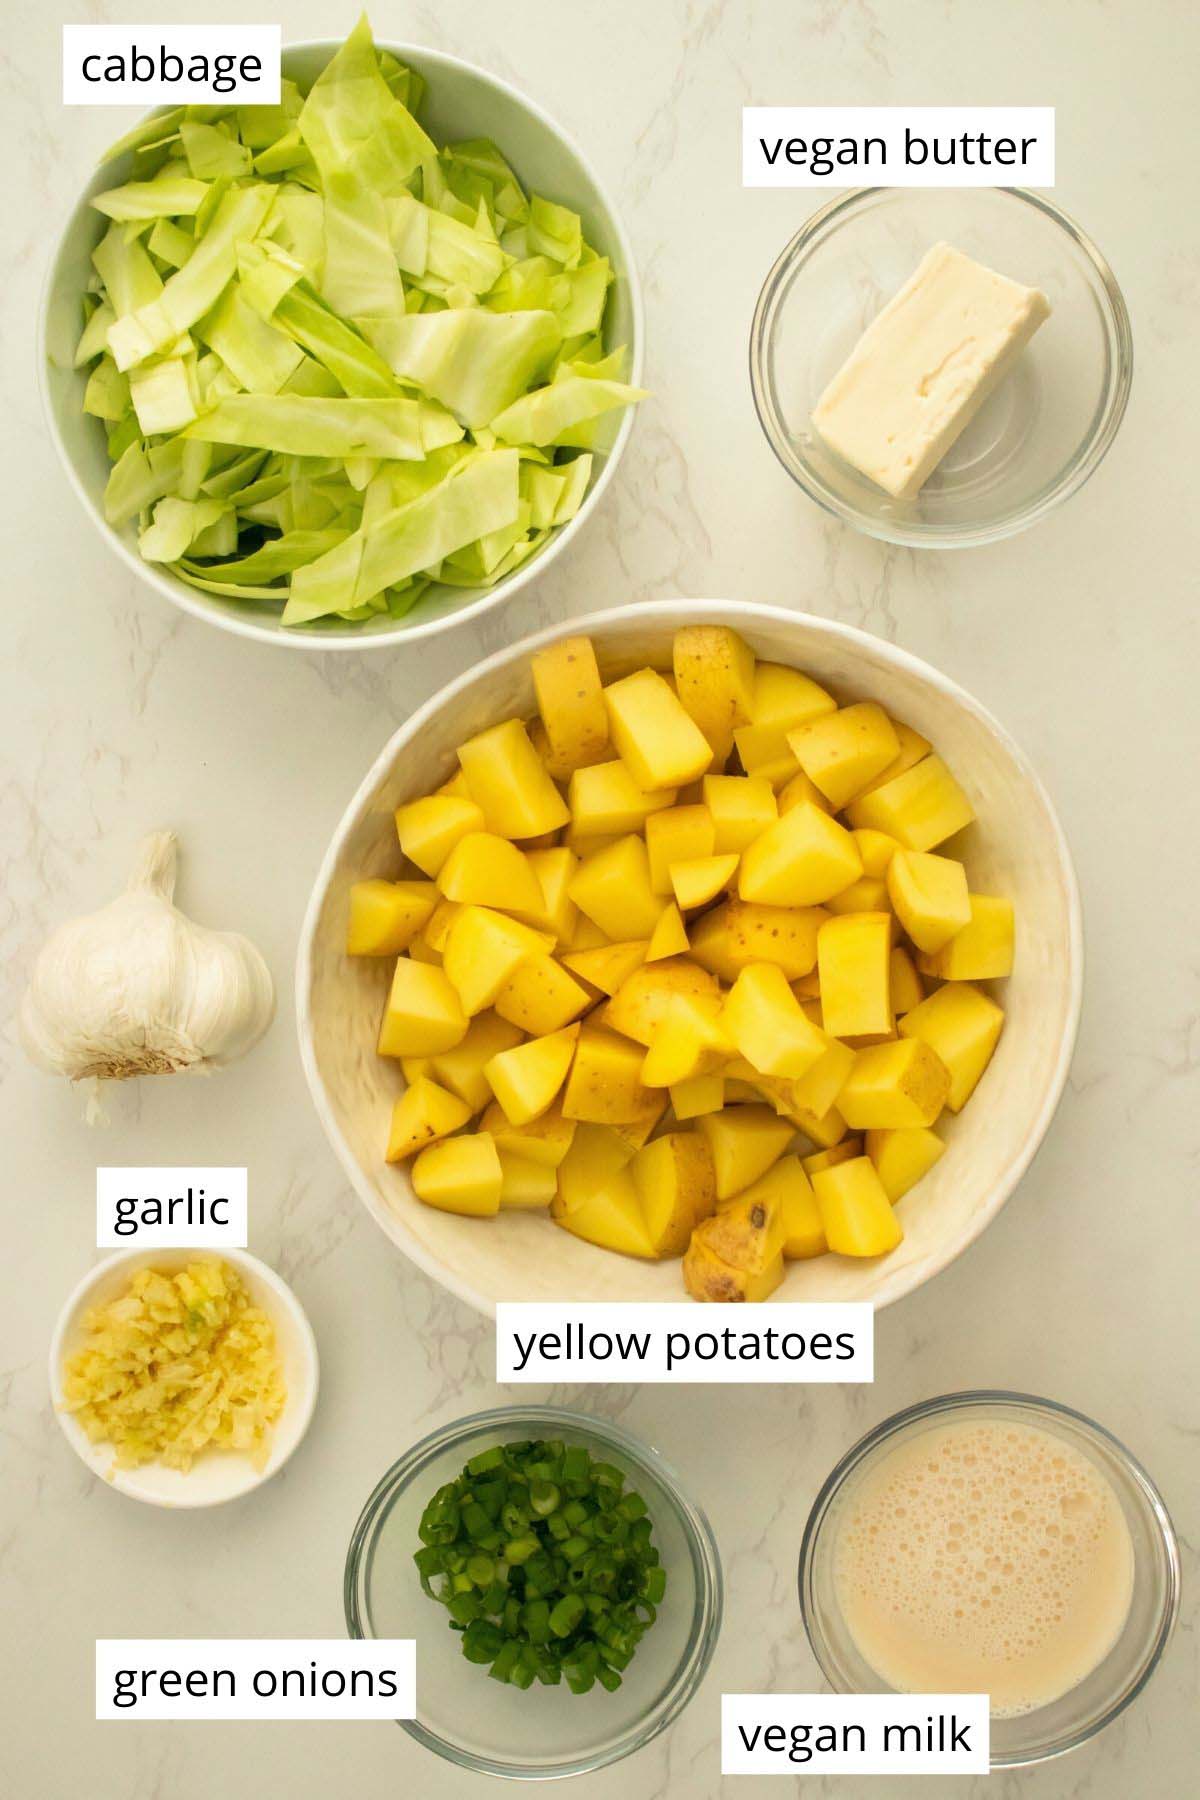 potatoes, cabbage, and other ingredients in bowls on a white table, text labels on each ingredient